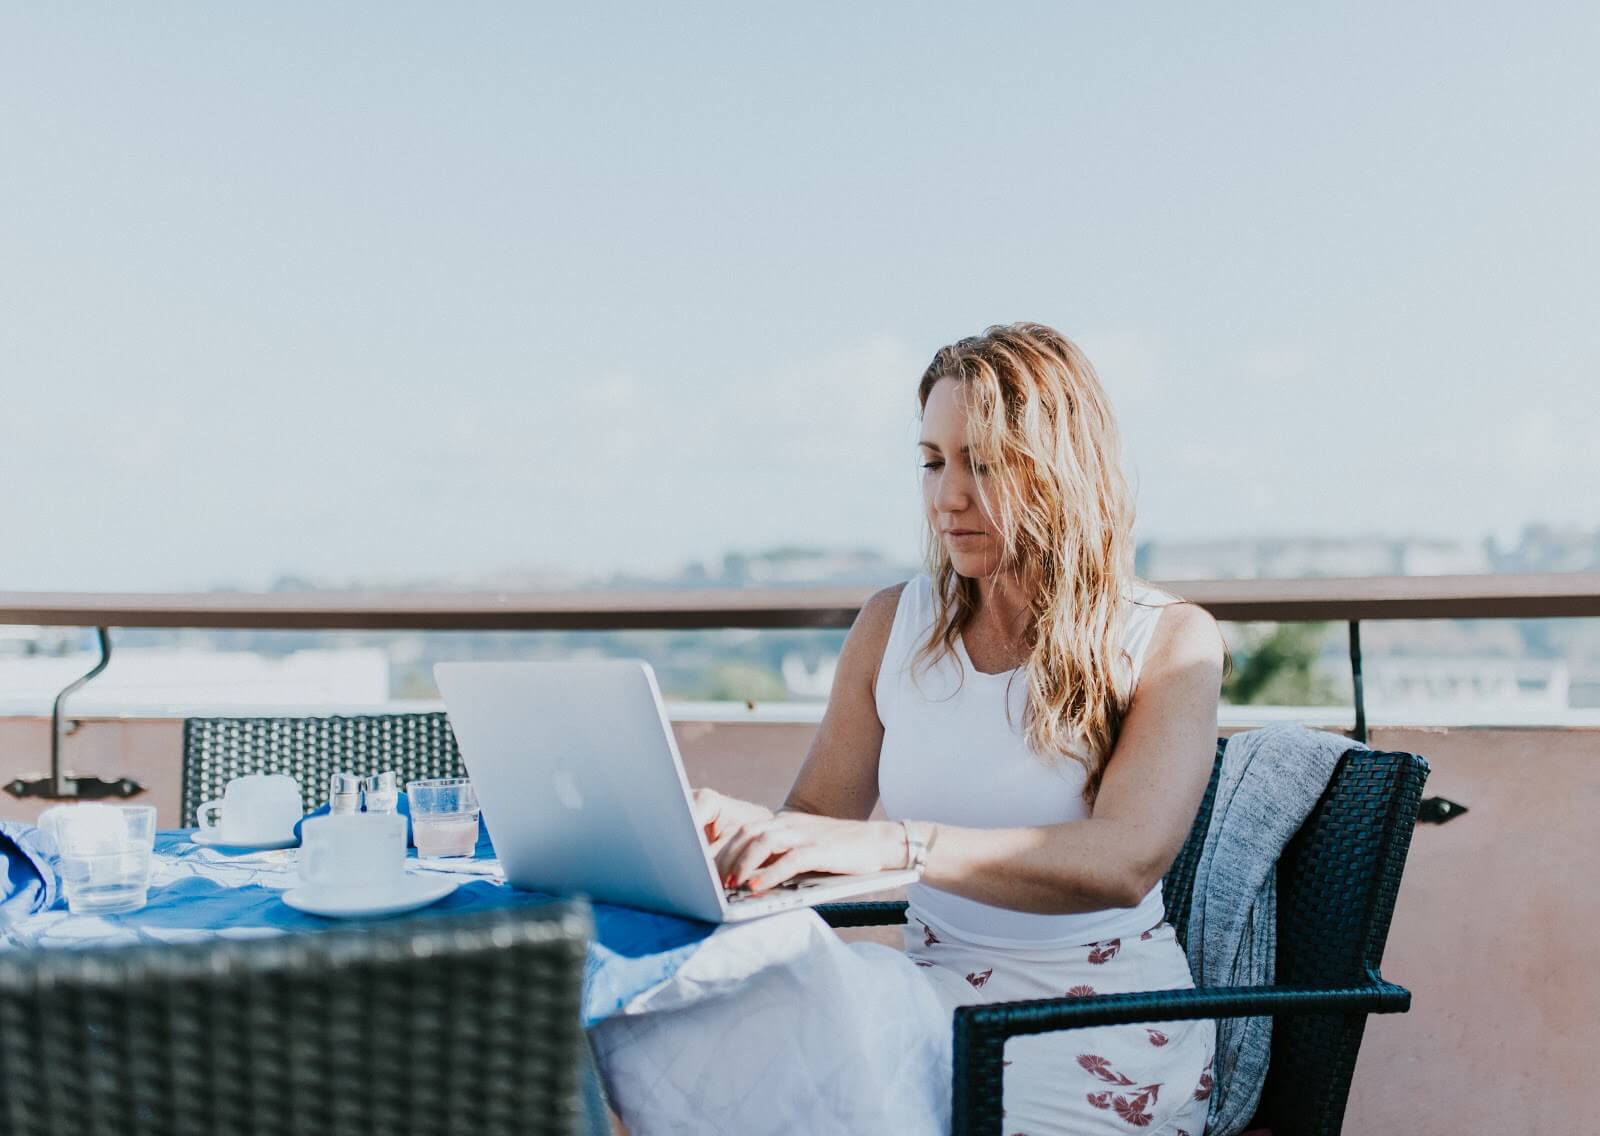 Online jobs: Woman working from her laptop on a terrace